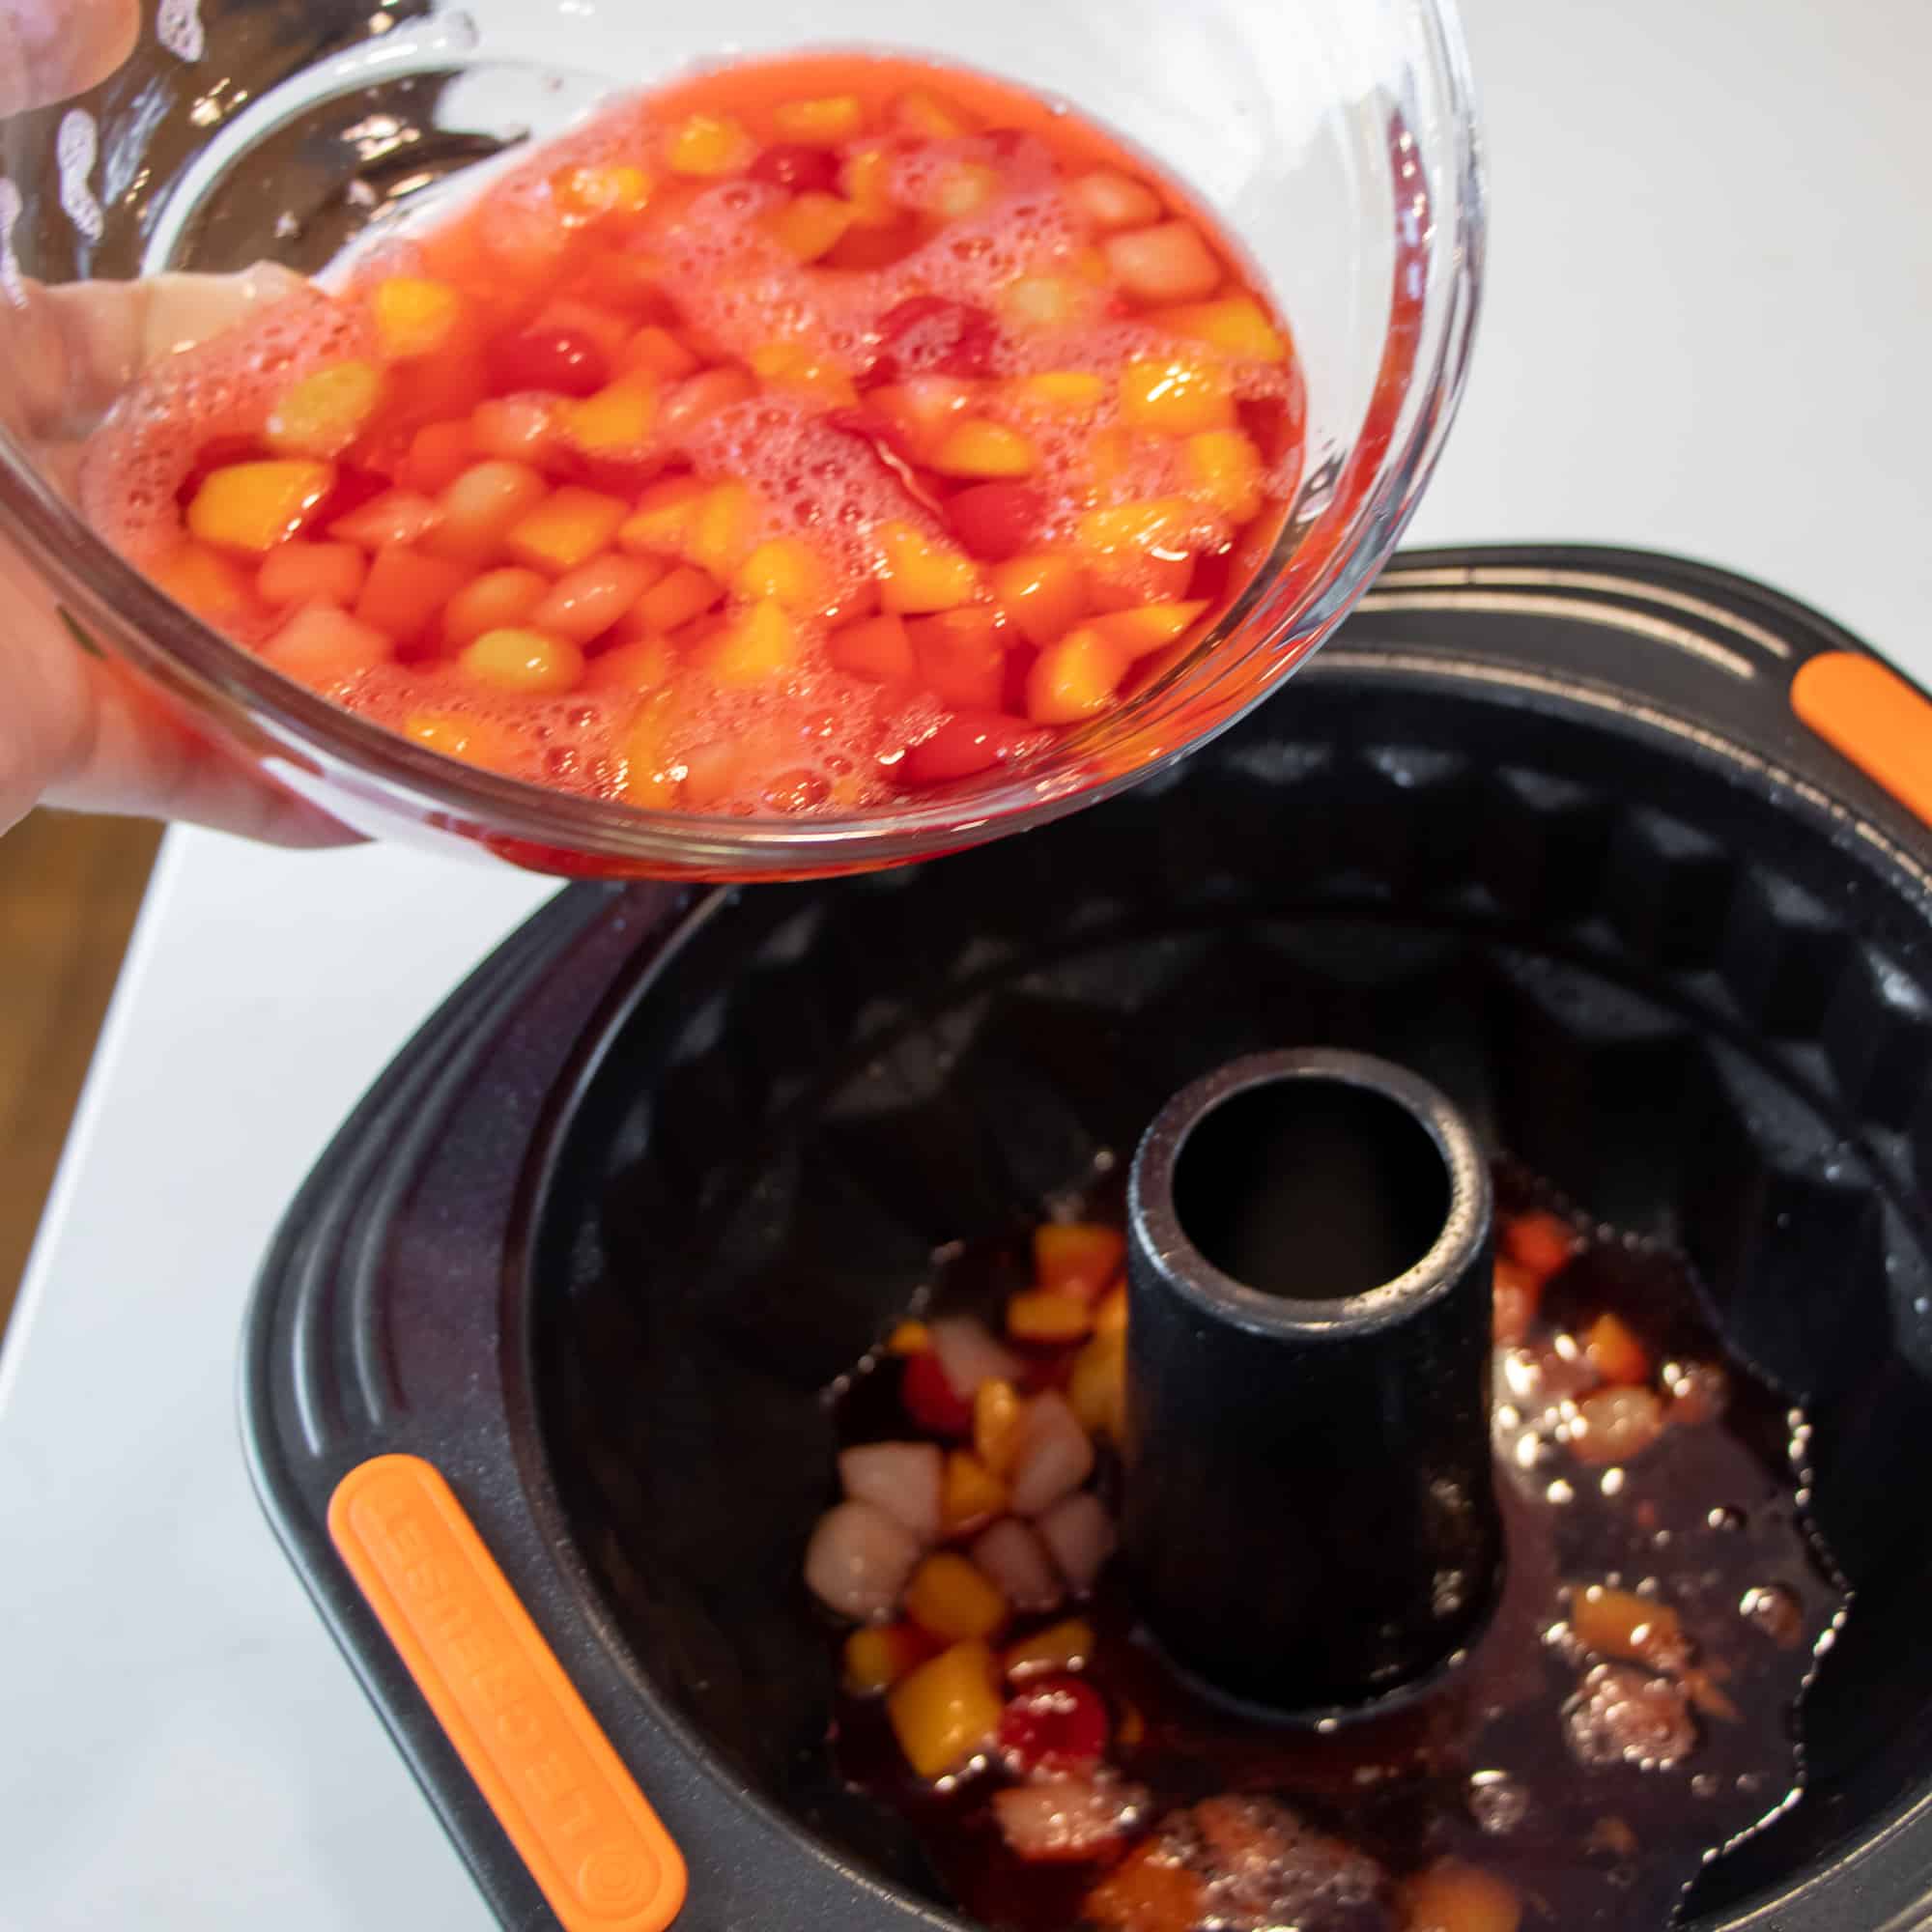 A bowl with half the jello and mixed fruit being poured into a bundt pan.